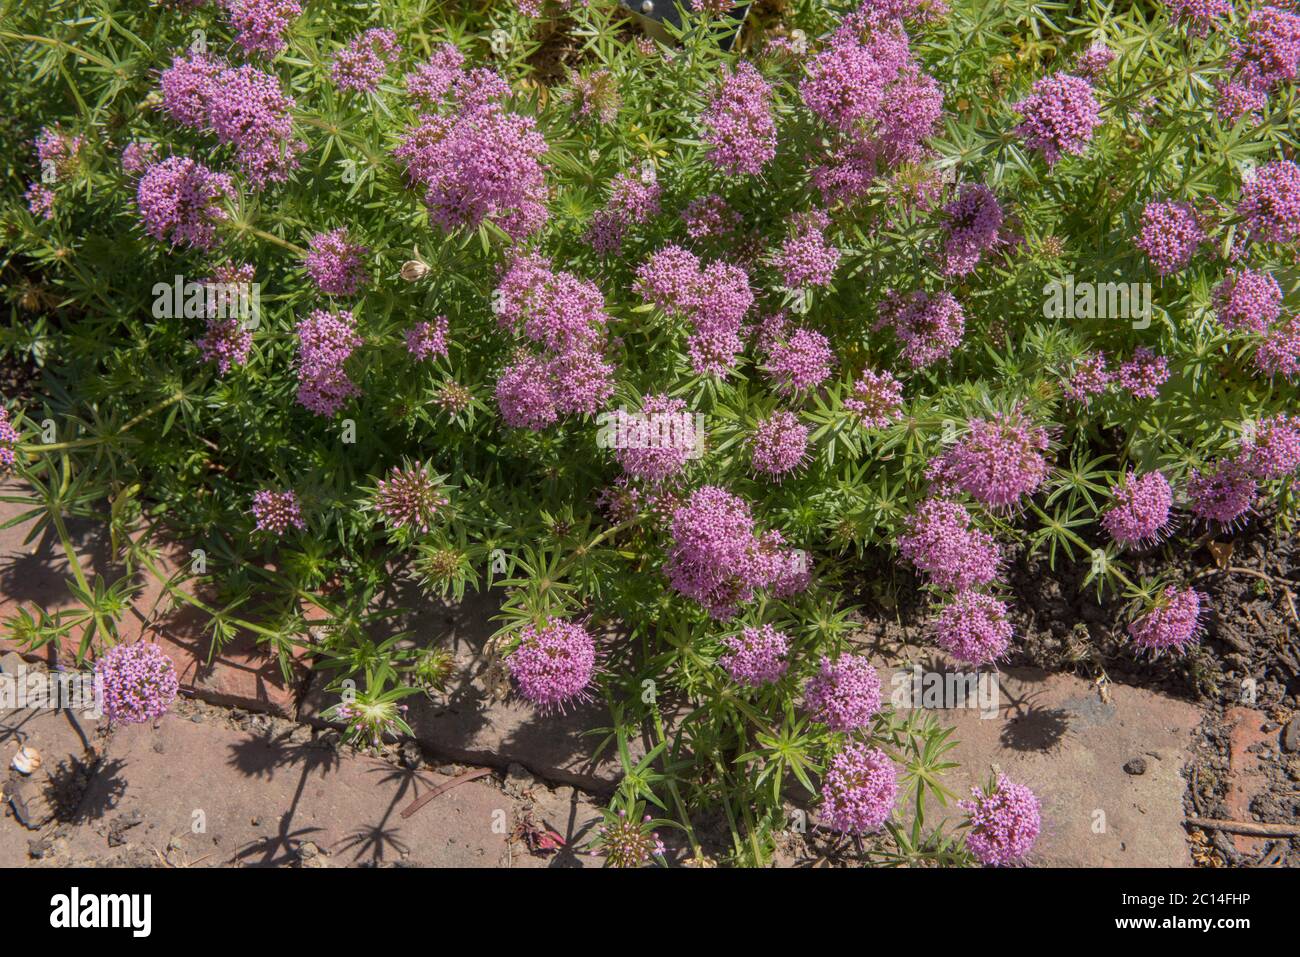 Summer Flowering Pink Caucasian Crosswort Plants (Phuopsis stylosa)Growing  in a Herbaceous Border in a Country Cottage Garden in Rural Devon, England Stock Photo